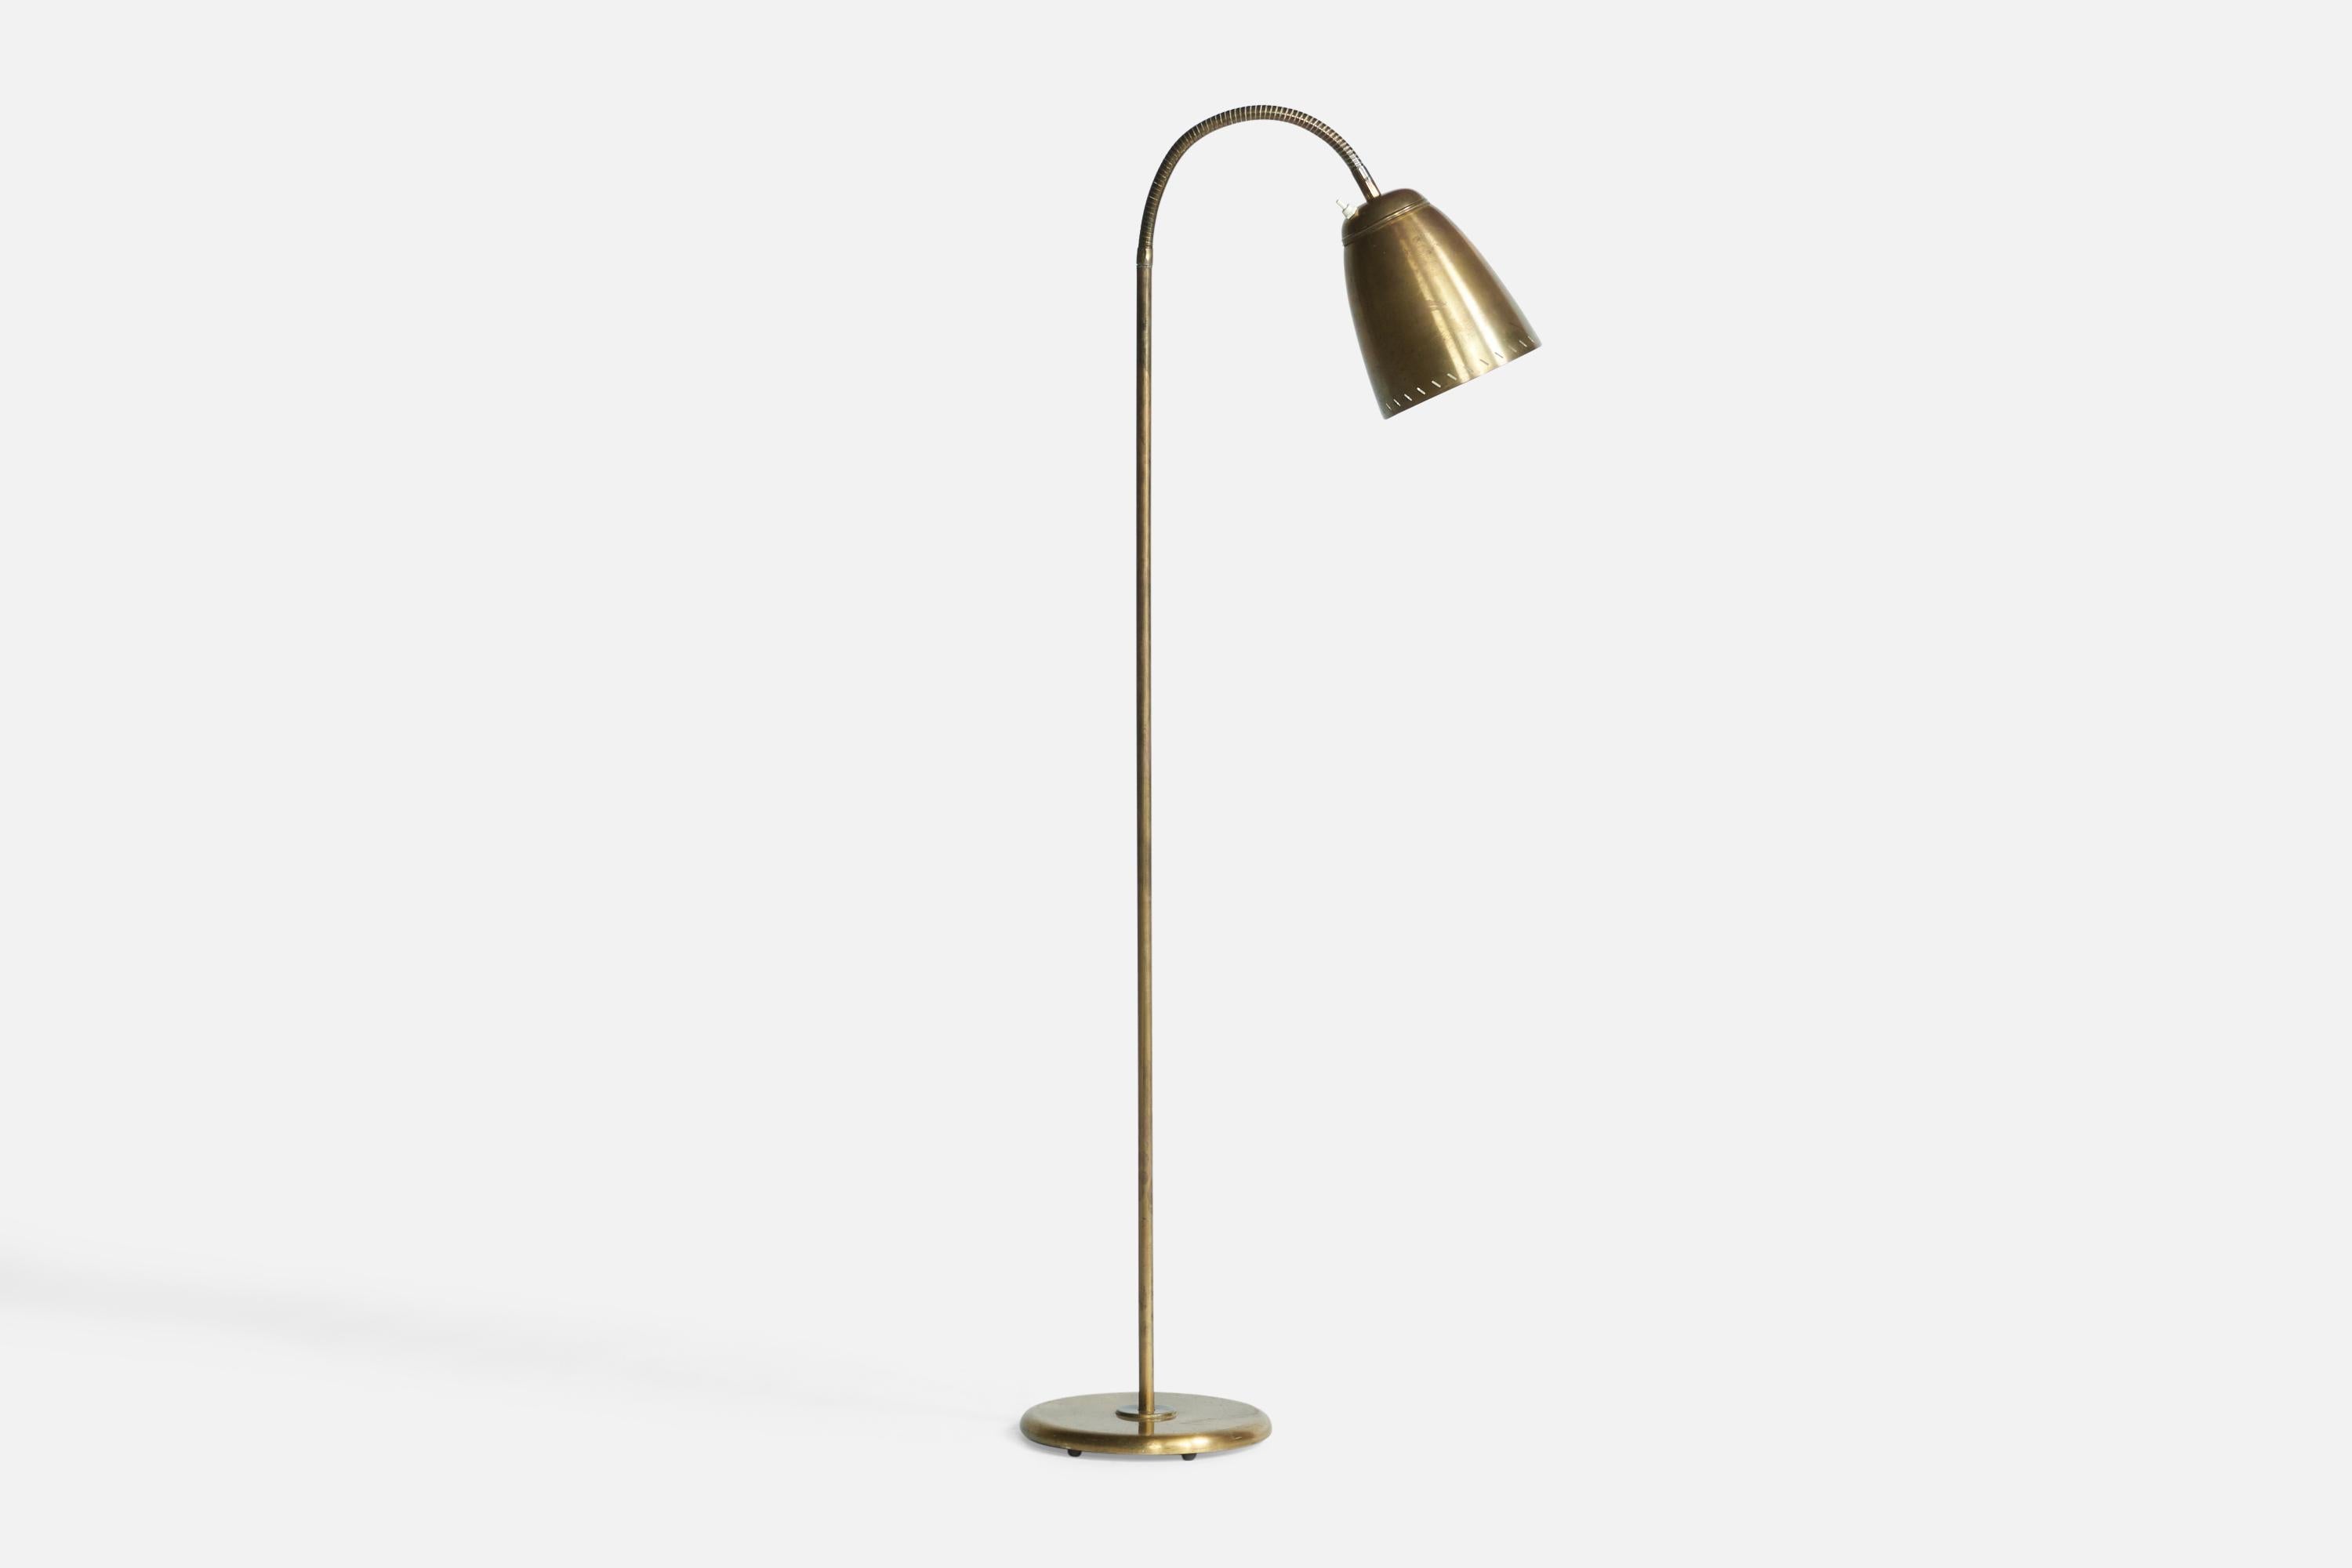 An adjustable brass floor lamp designed and produced in Sweden, 1940s.
Dimensions adjustable based on position of light.

Overall Dimensions (inches): 51.75” H x 10” W x 21.3” D. Base diameter is 10